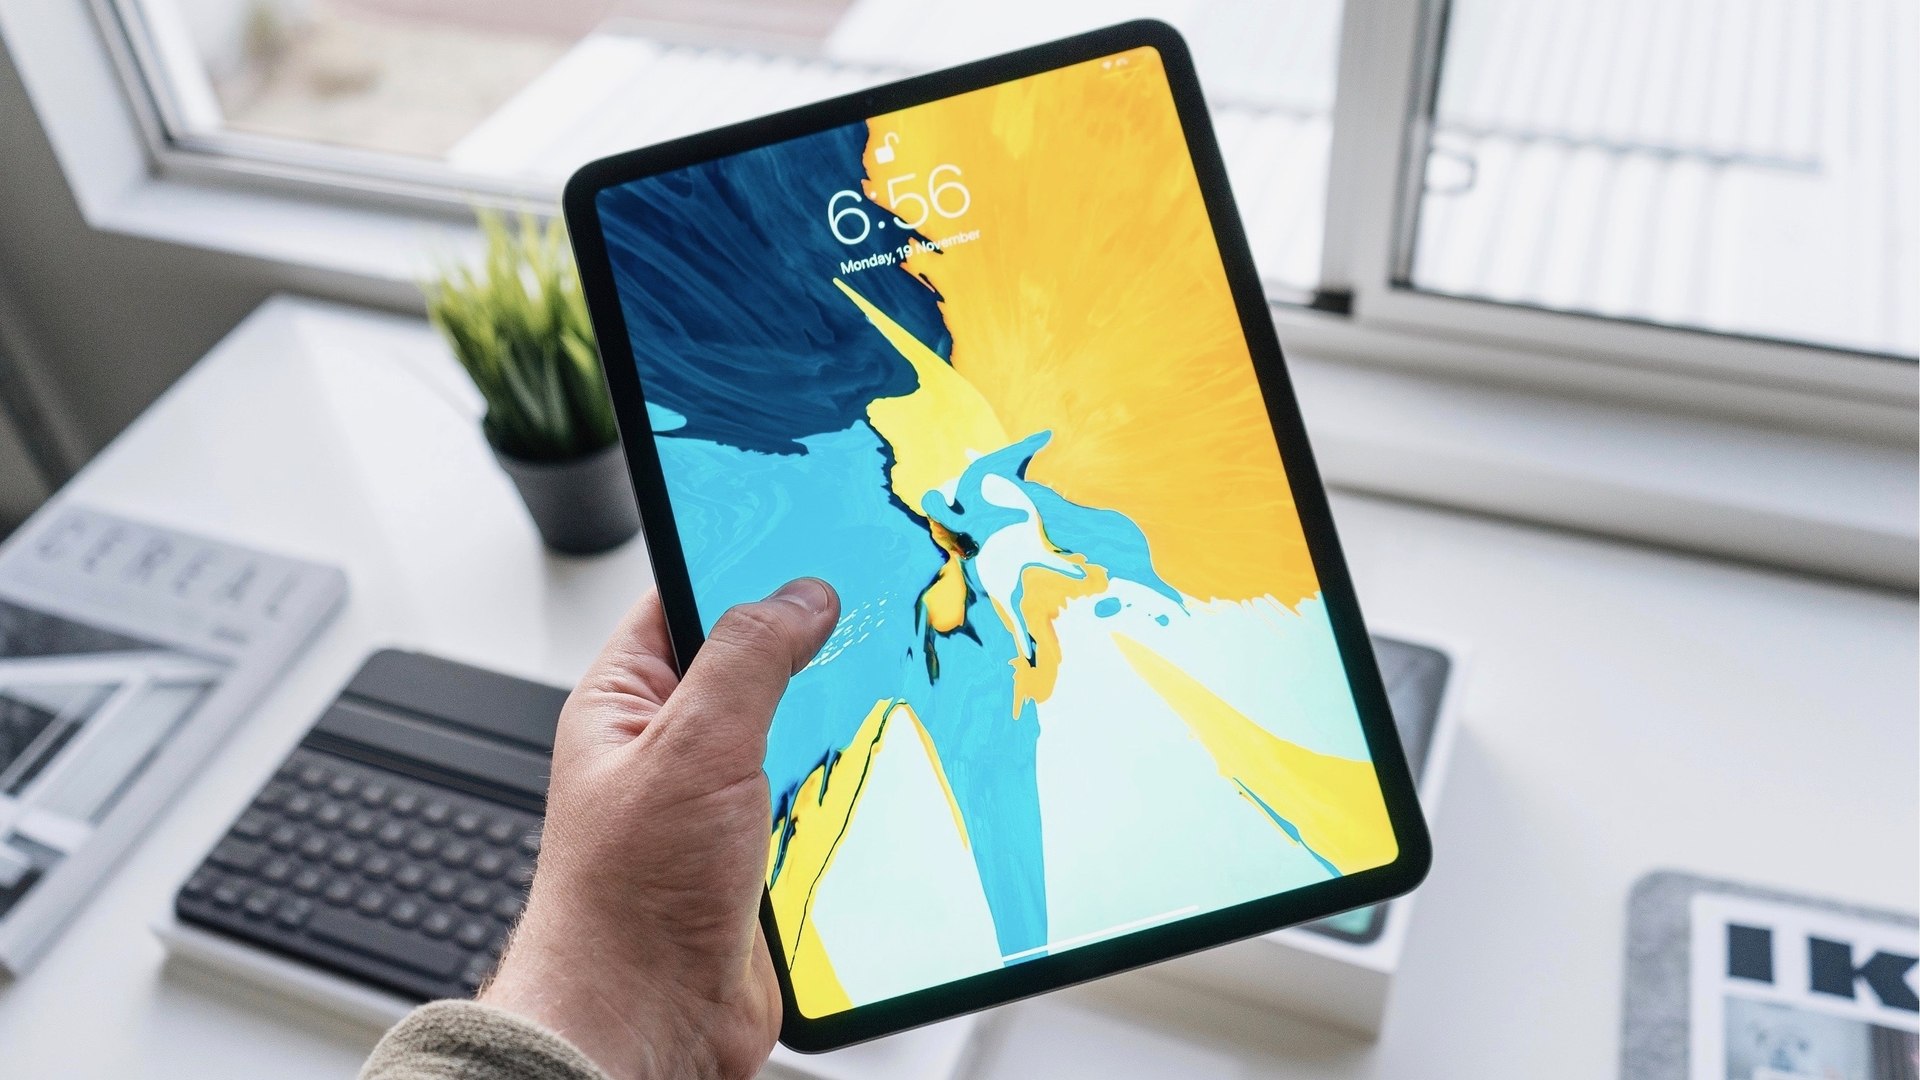 iPad Pro in hand and unlocked with Face I D